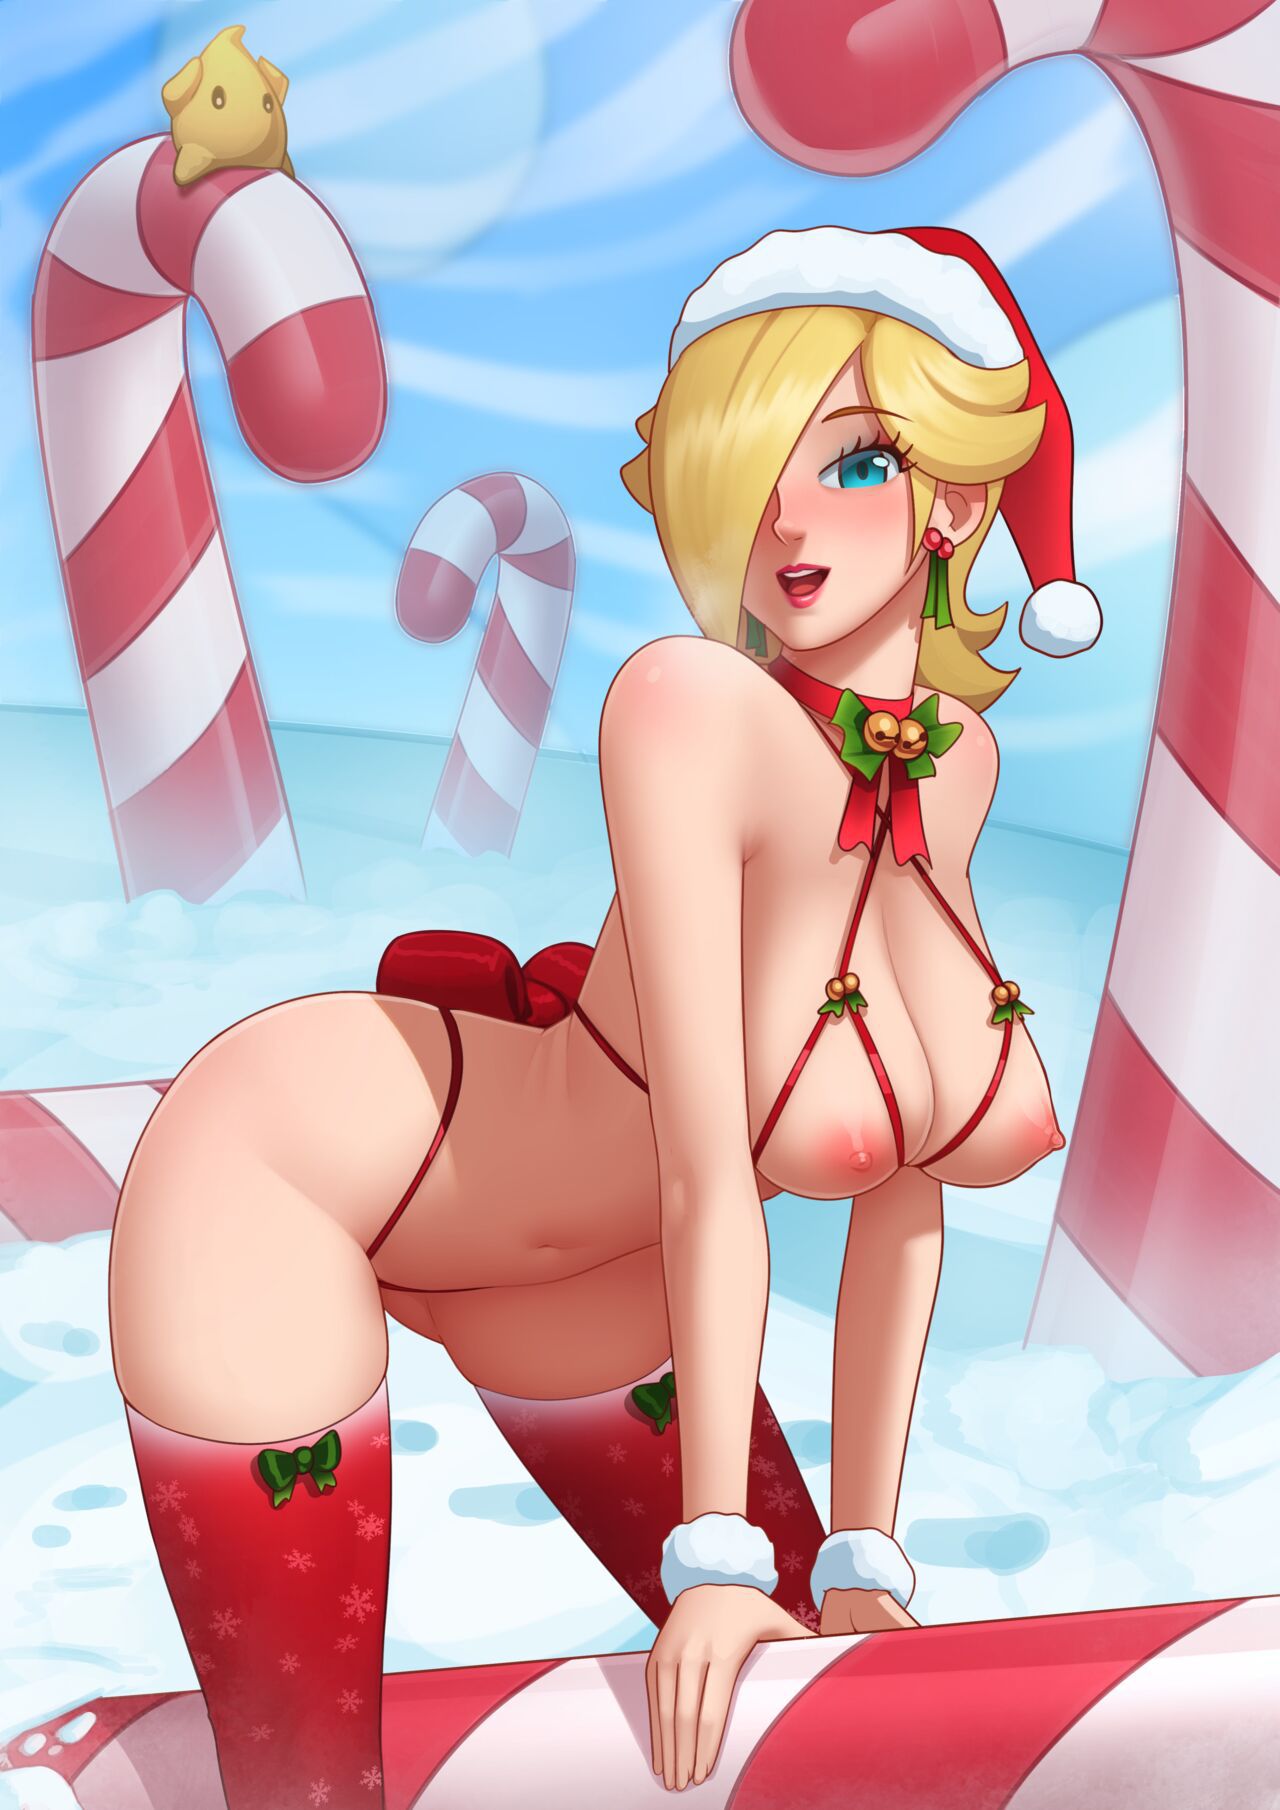 [Deilan12] Candy Canes Appeared 11